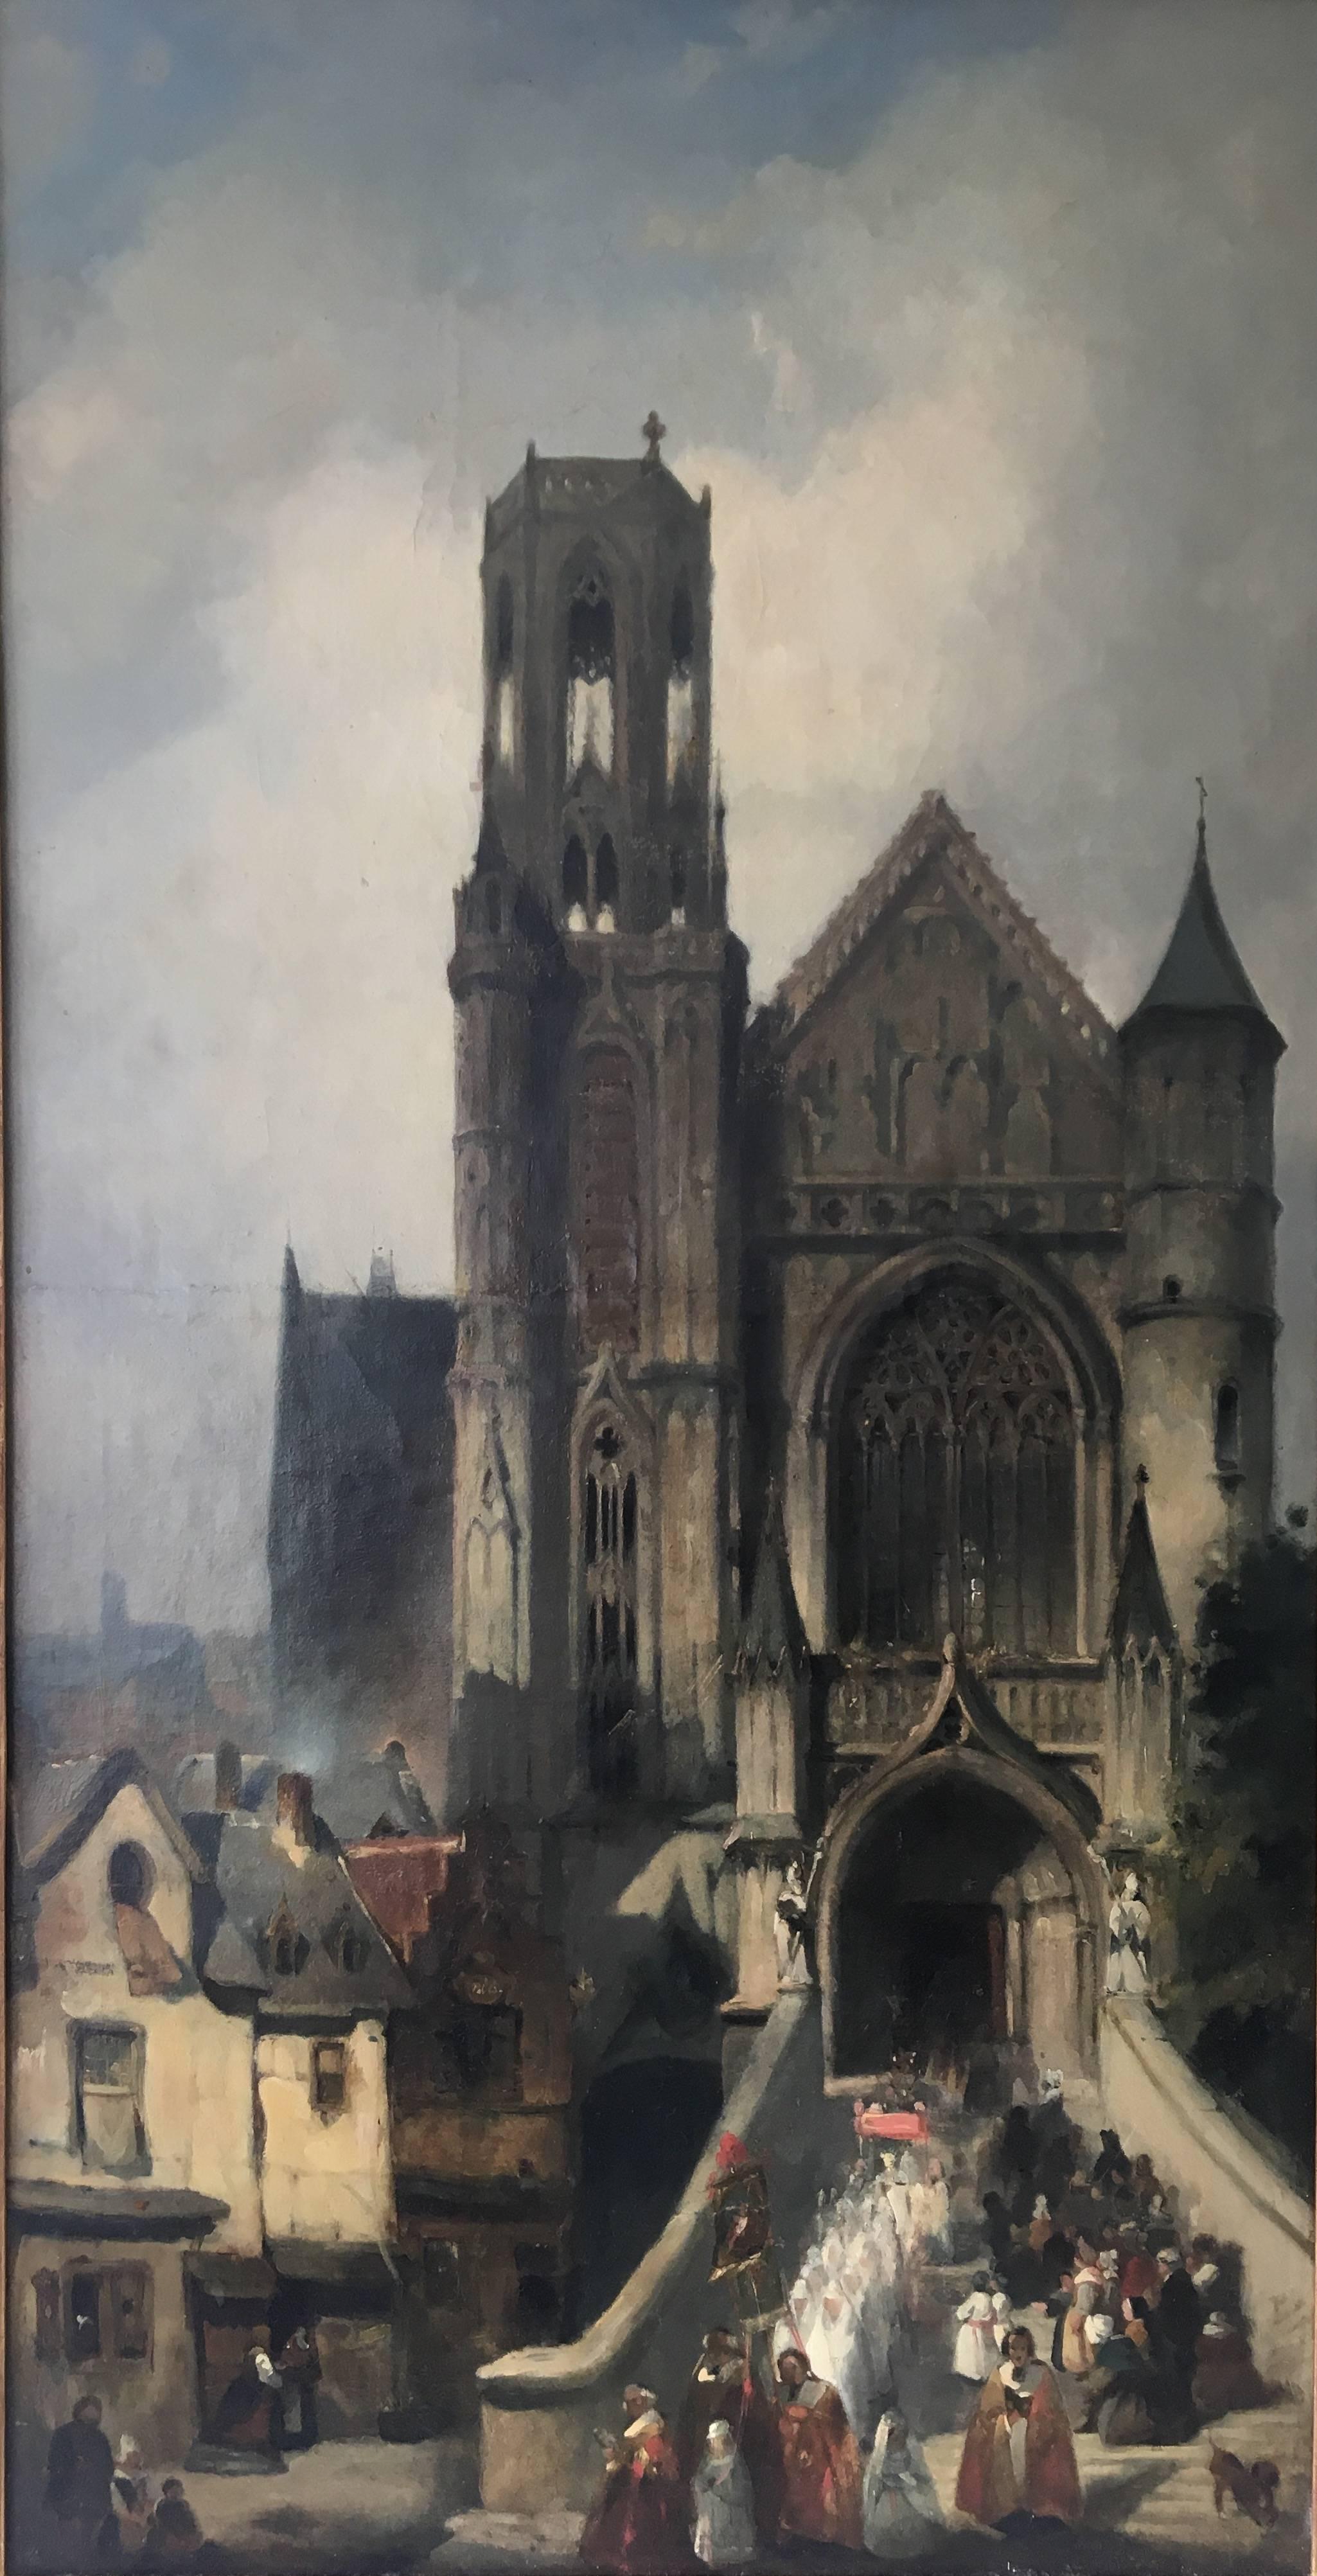 Uncommon scene, painted by the Dutch Painter Joseph Bles! (1825-1875).
This large oil on canvas work, was Marouflaged on panel and features a religious scenery. The outgoing procession seems to take place in a Northern French environment. 
As a